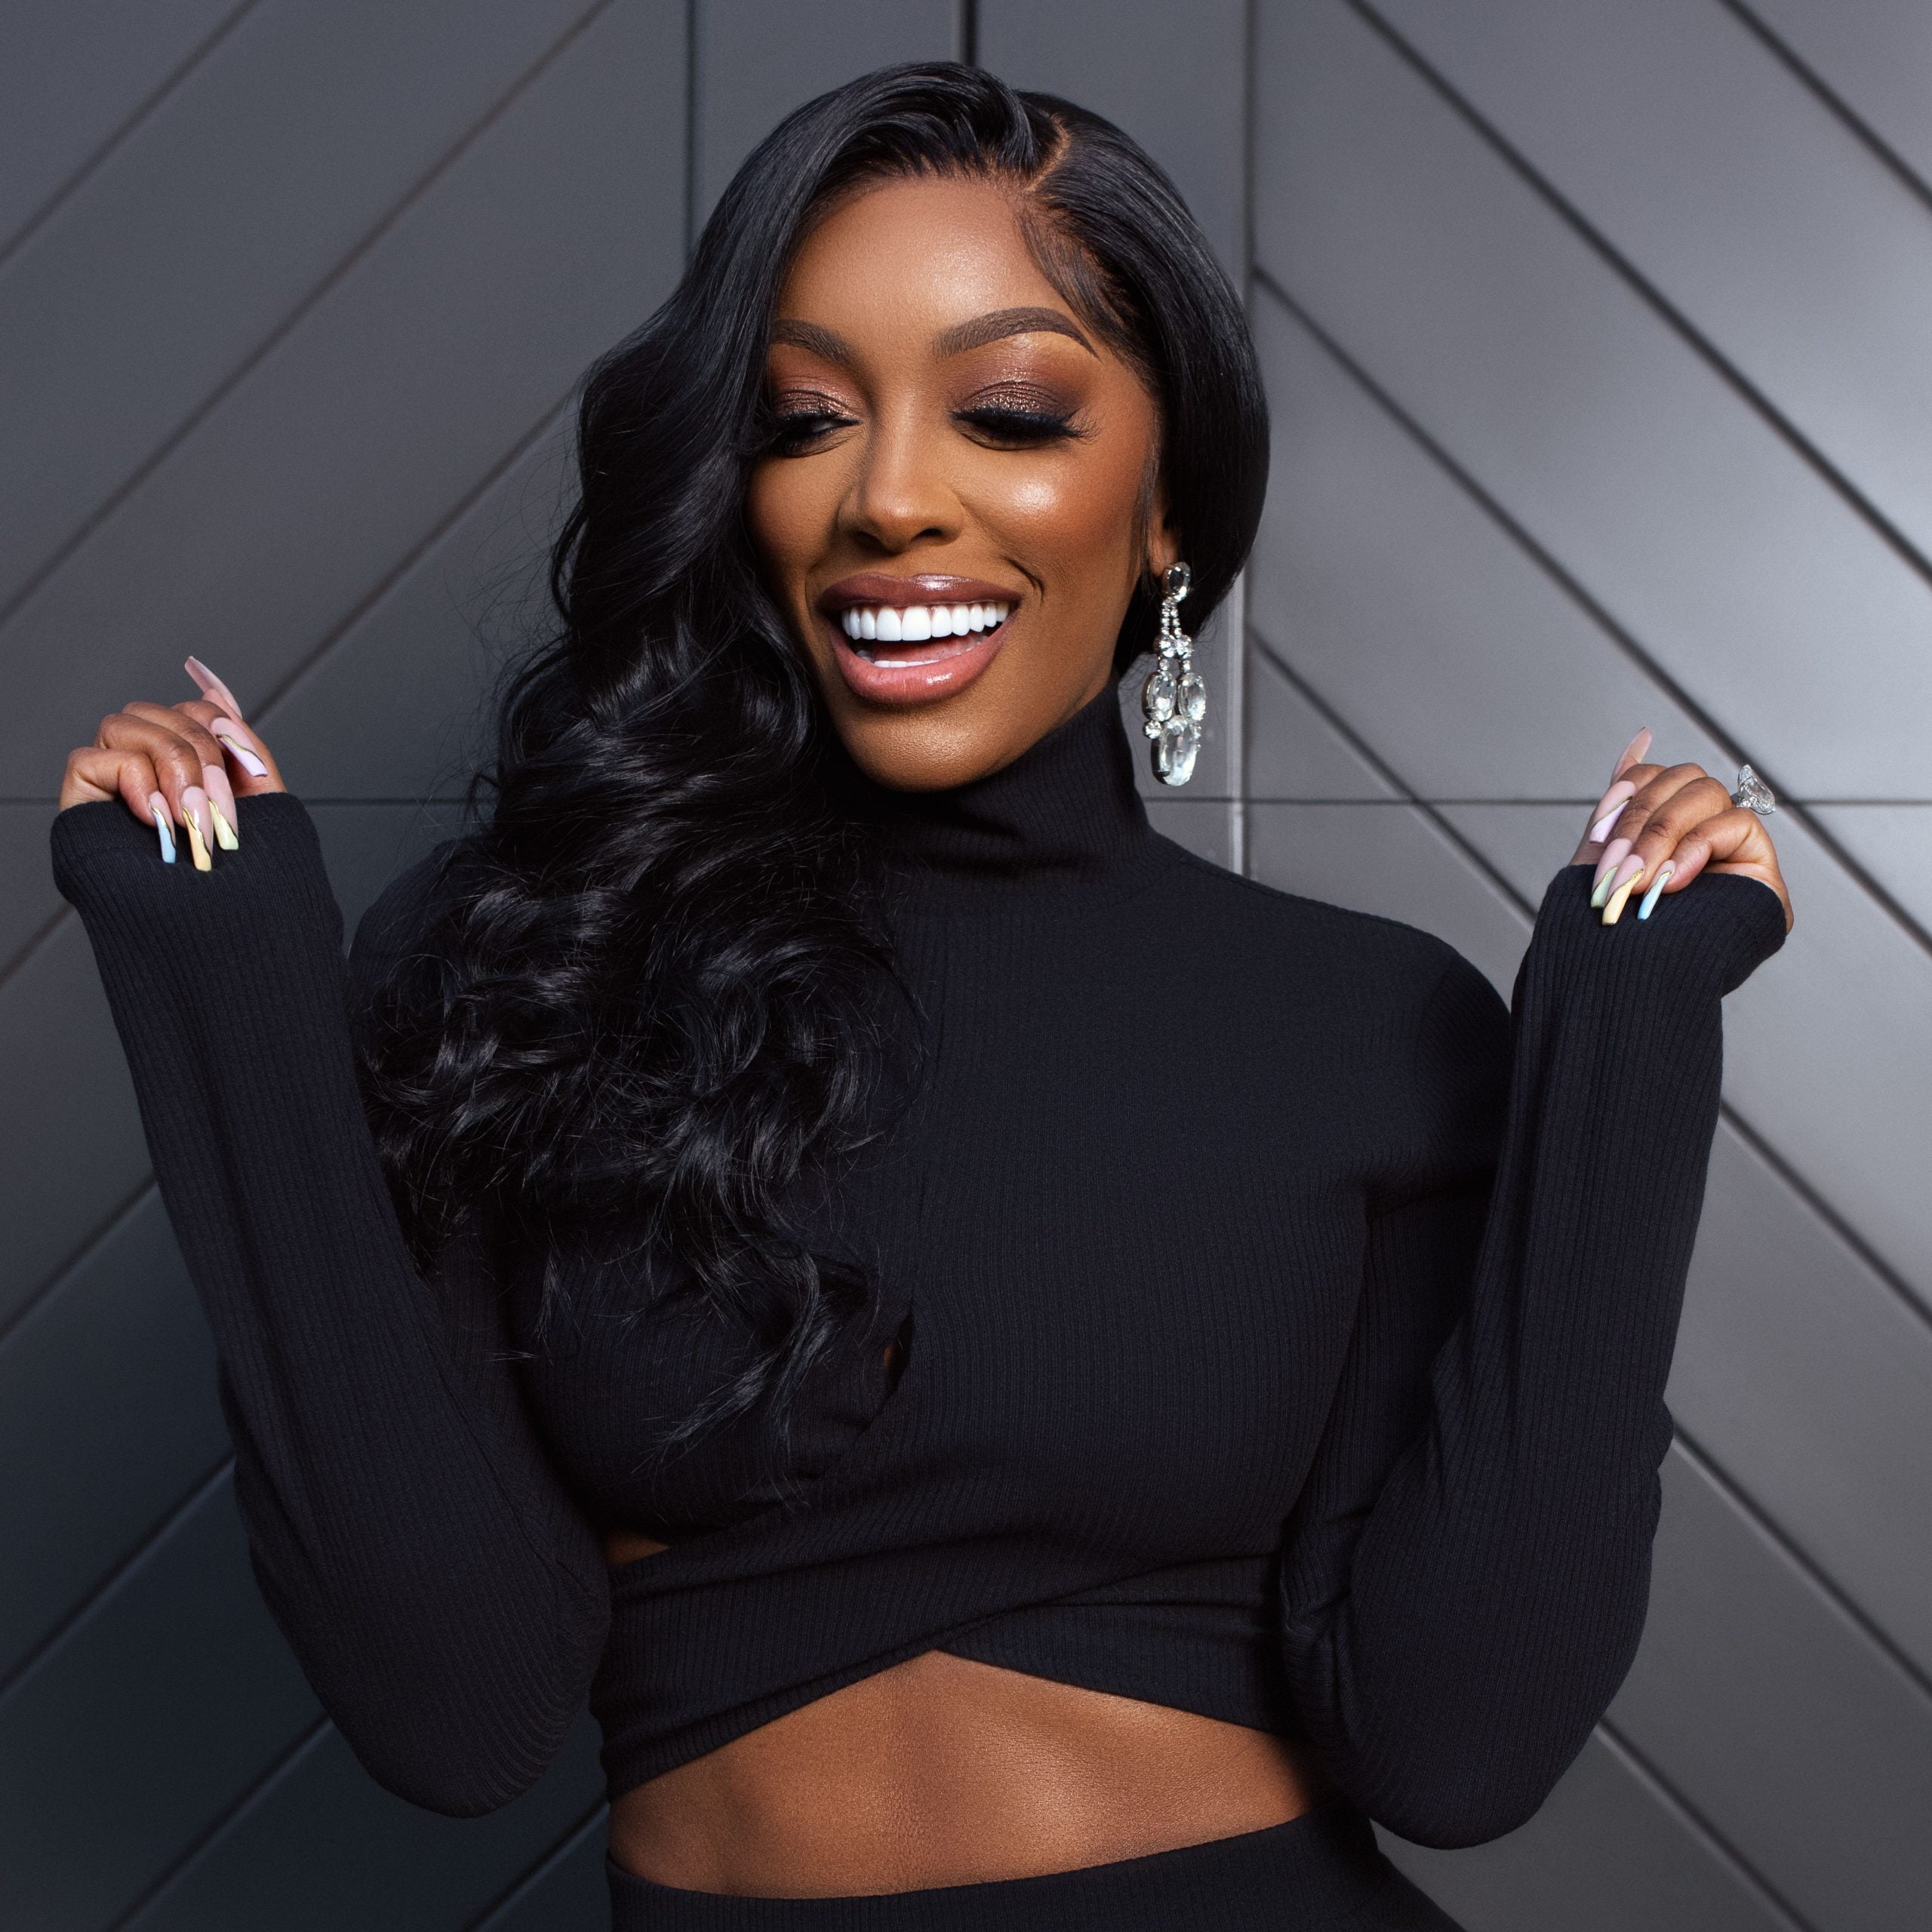 Housewives Star Porsha Williams Debuts Exclusive The Drop Collection